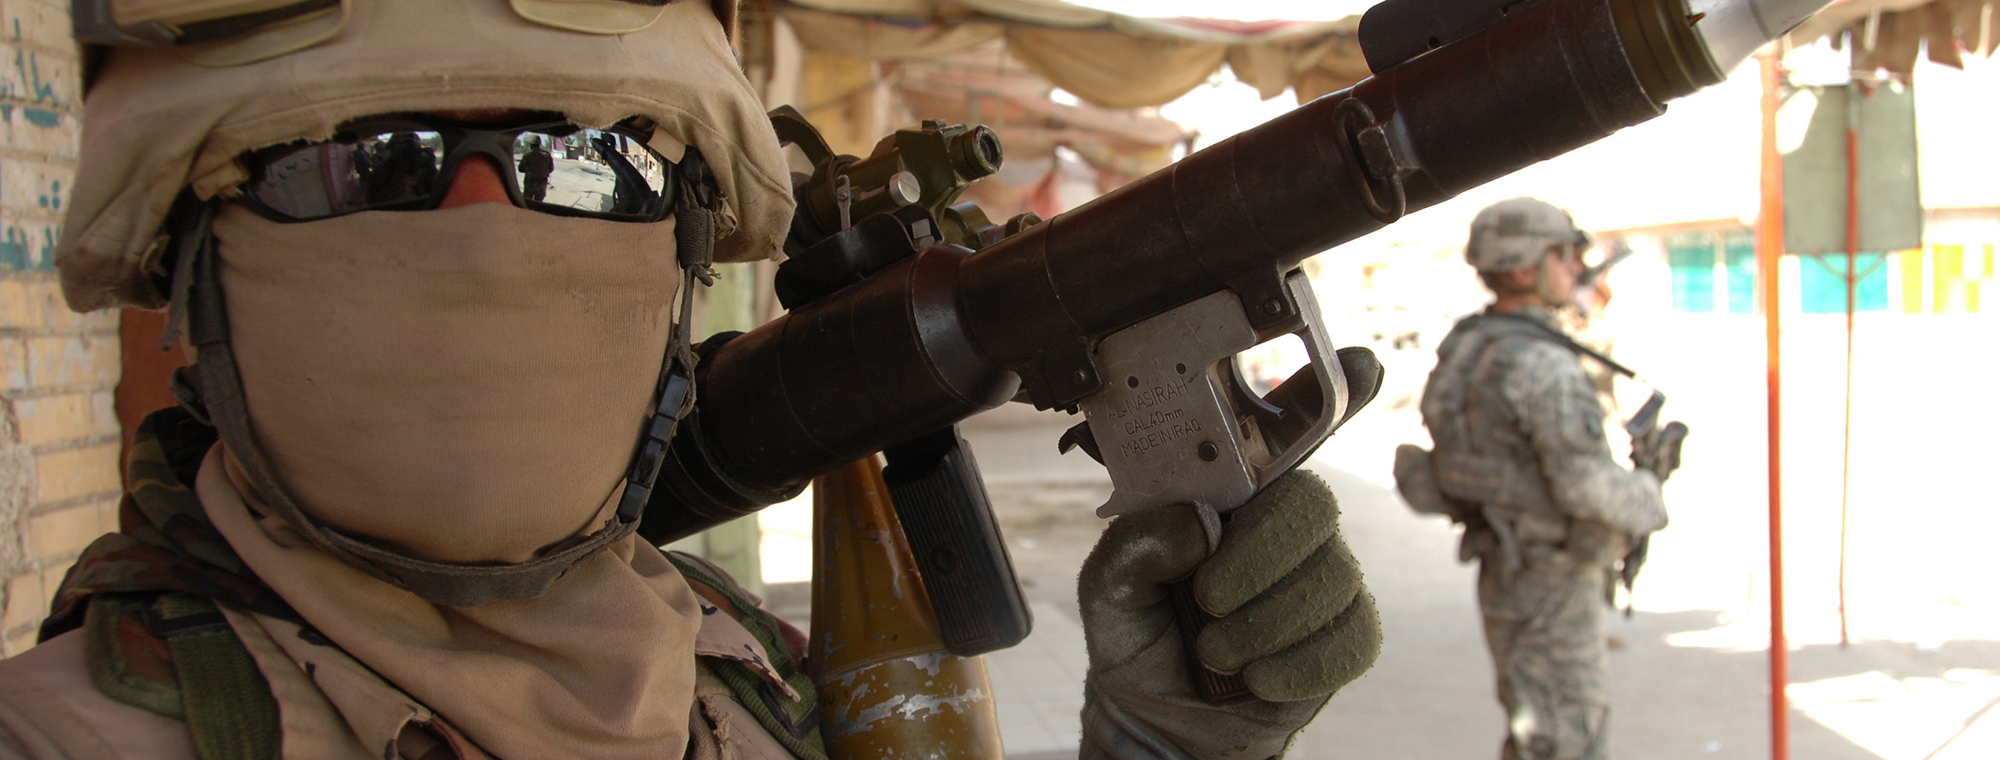 An Iraqi army soldier poses for a picture with his weapon during a mission in Mahmudiyah, Iraq, March 30, 2008. US Army photo by Spc. Richard Del Vecchio